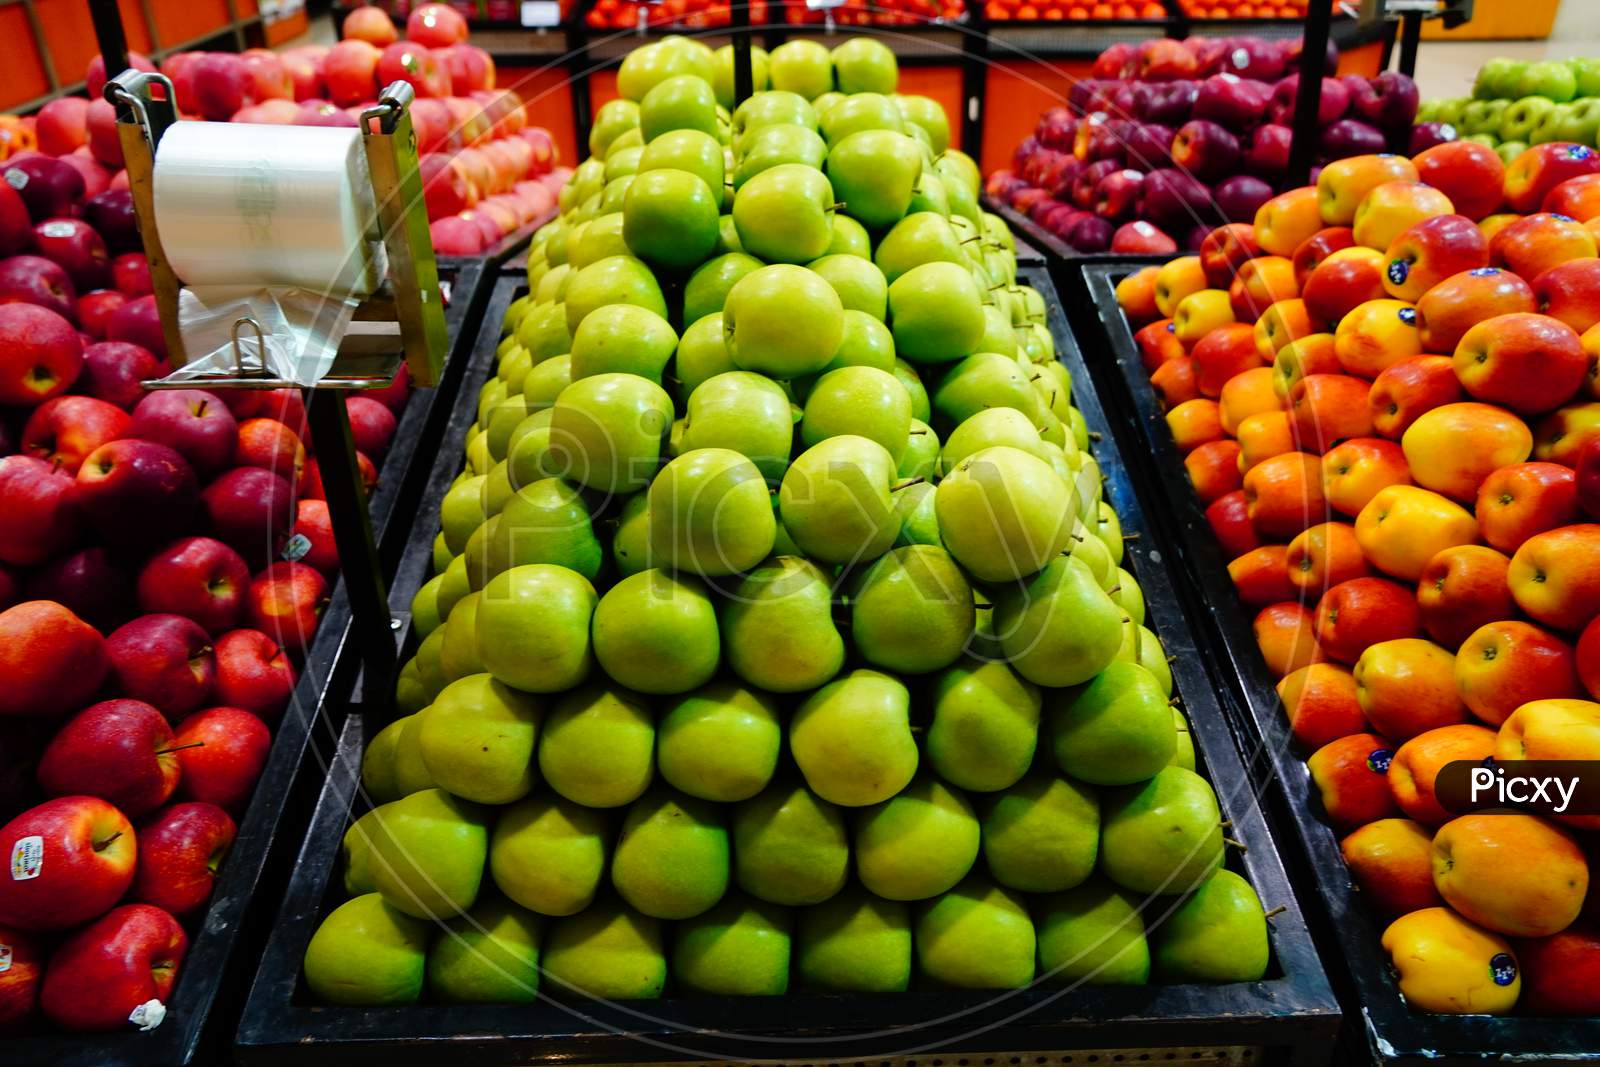 Bunch Of Green, Orange, Red Apples On Boxes In Supermarket. Apples Being Sold At Public Market. Organic Food Fresh Apples In Shop, Store - India